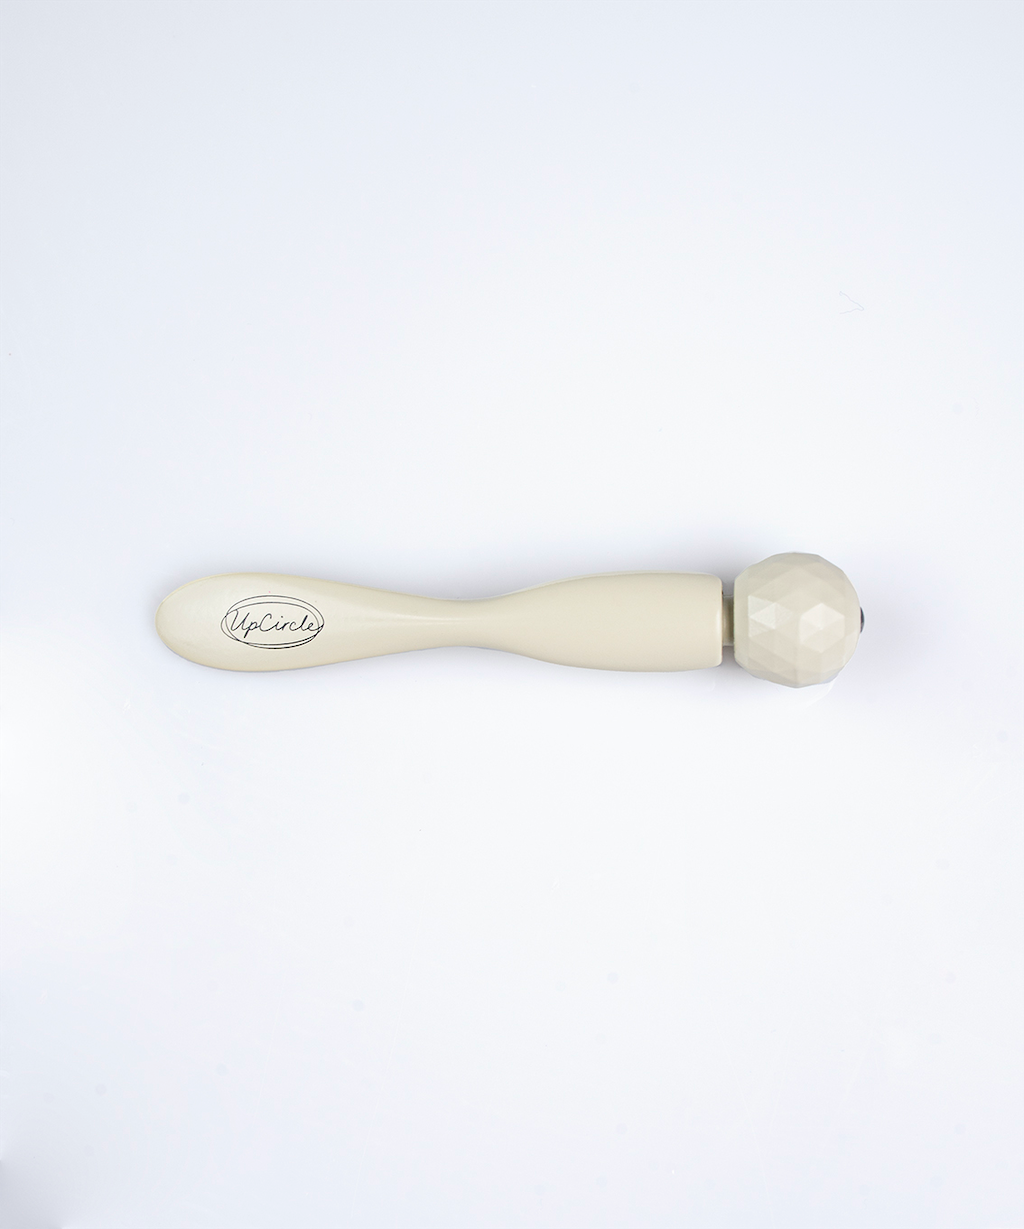 upcircle beauty eye roller tool laid flat on a white background